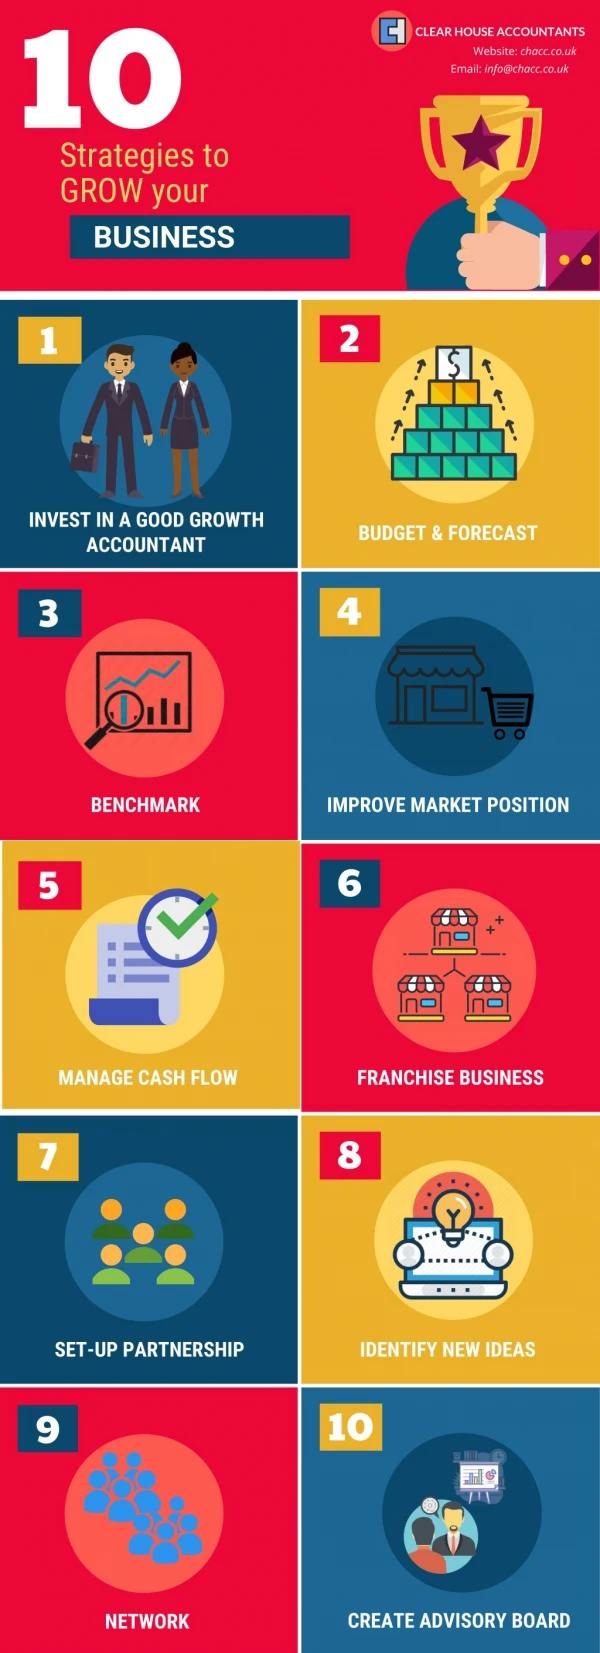 10 STRATEGIES TO GROW YOUR BUSINESS (INFOGRAPHICS)